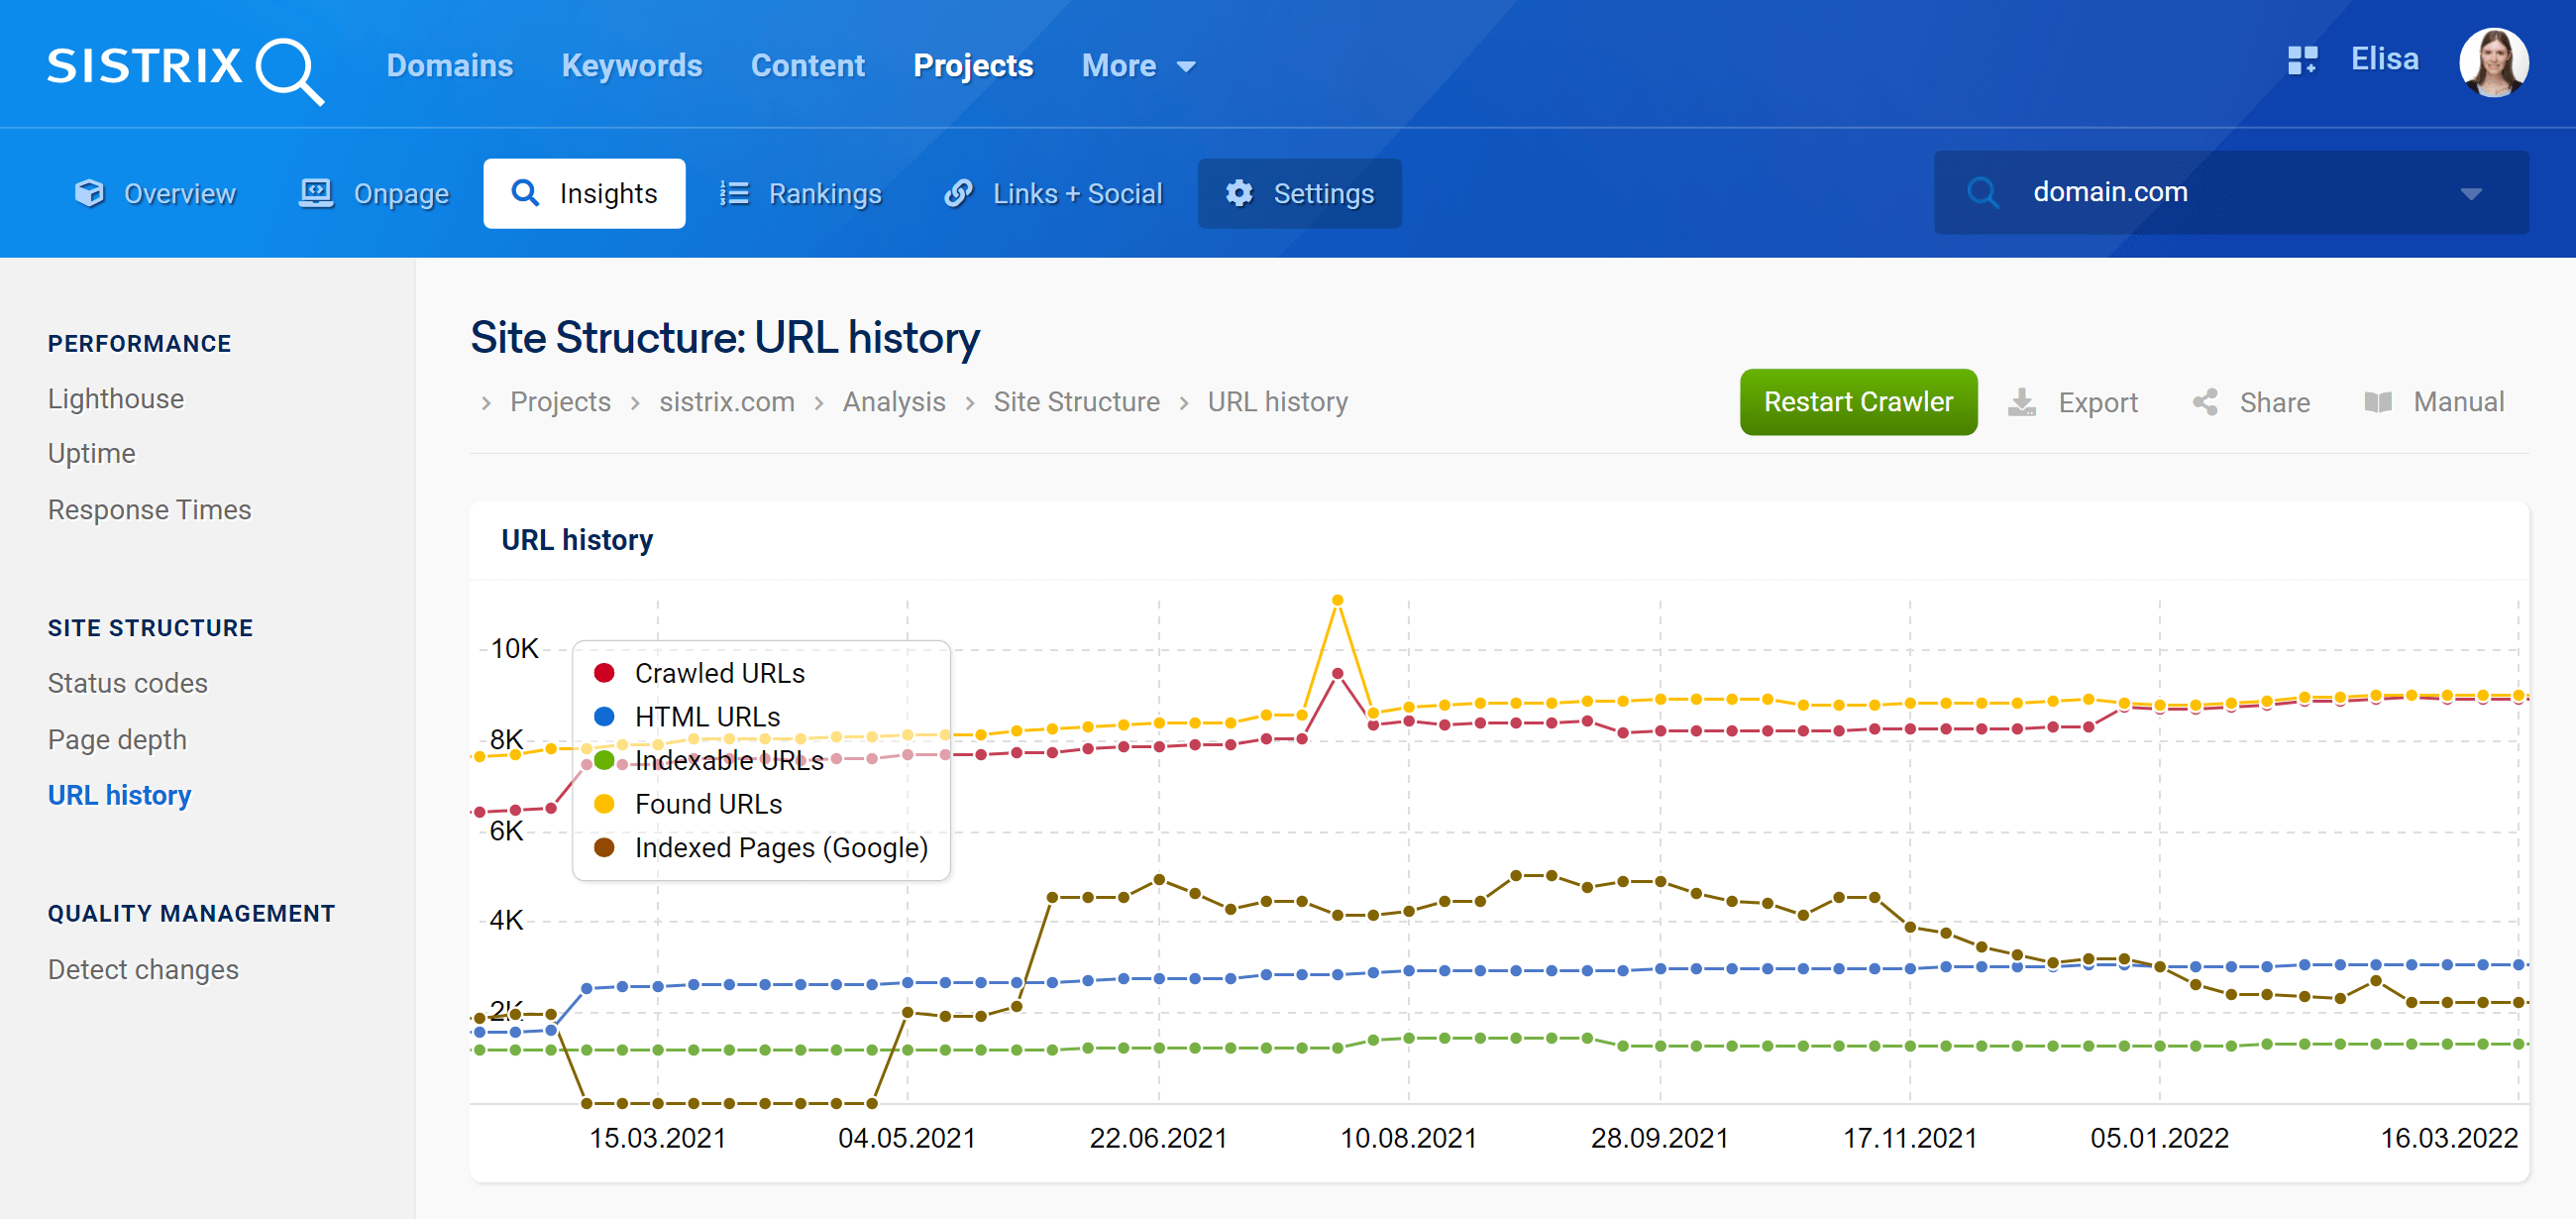 The feature "URL History" in the SISTRIX Optimizer